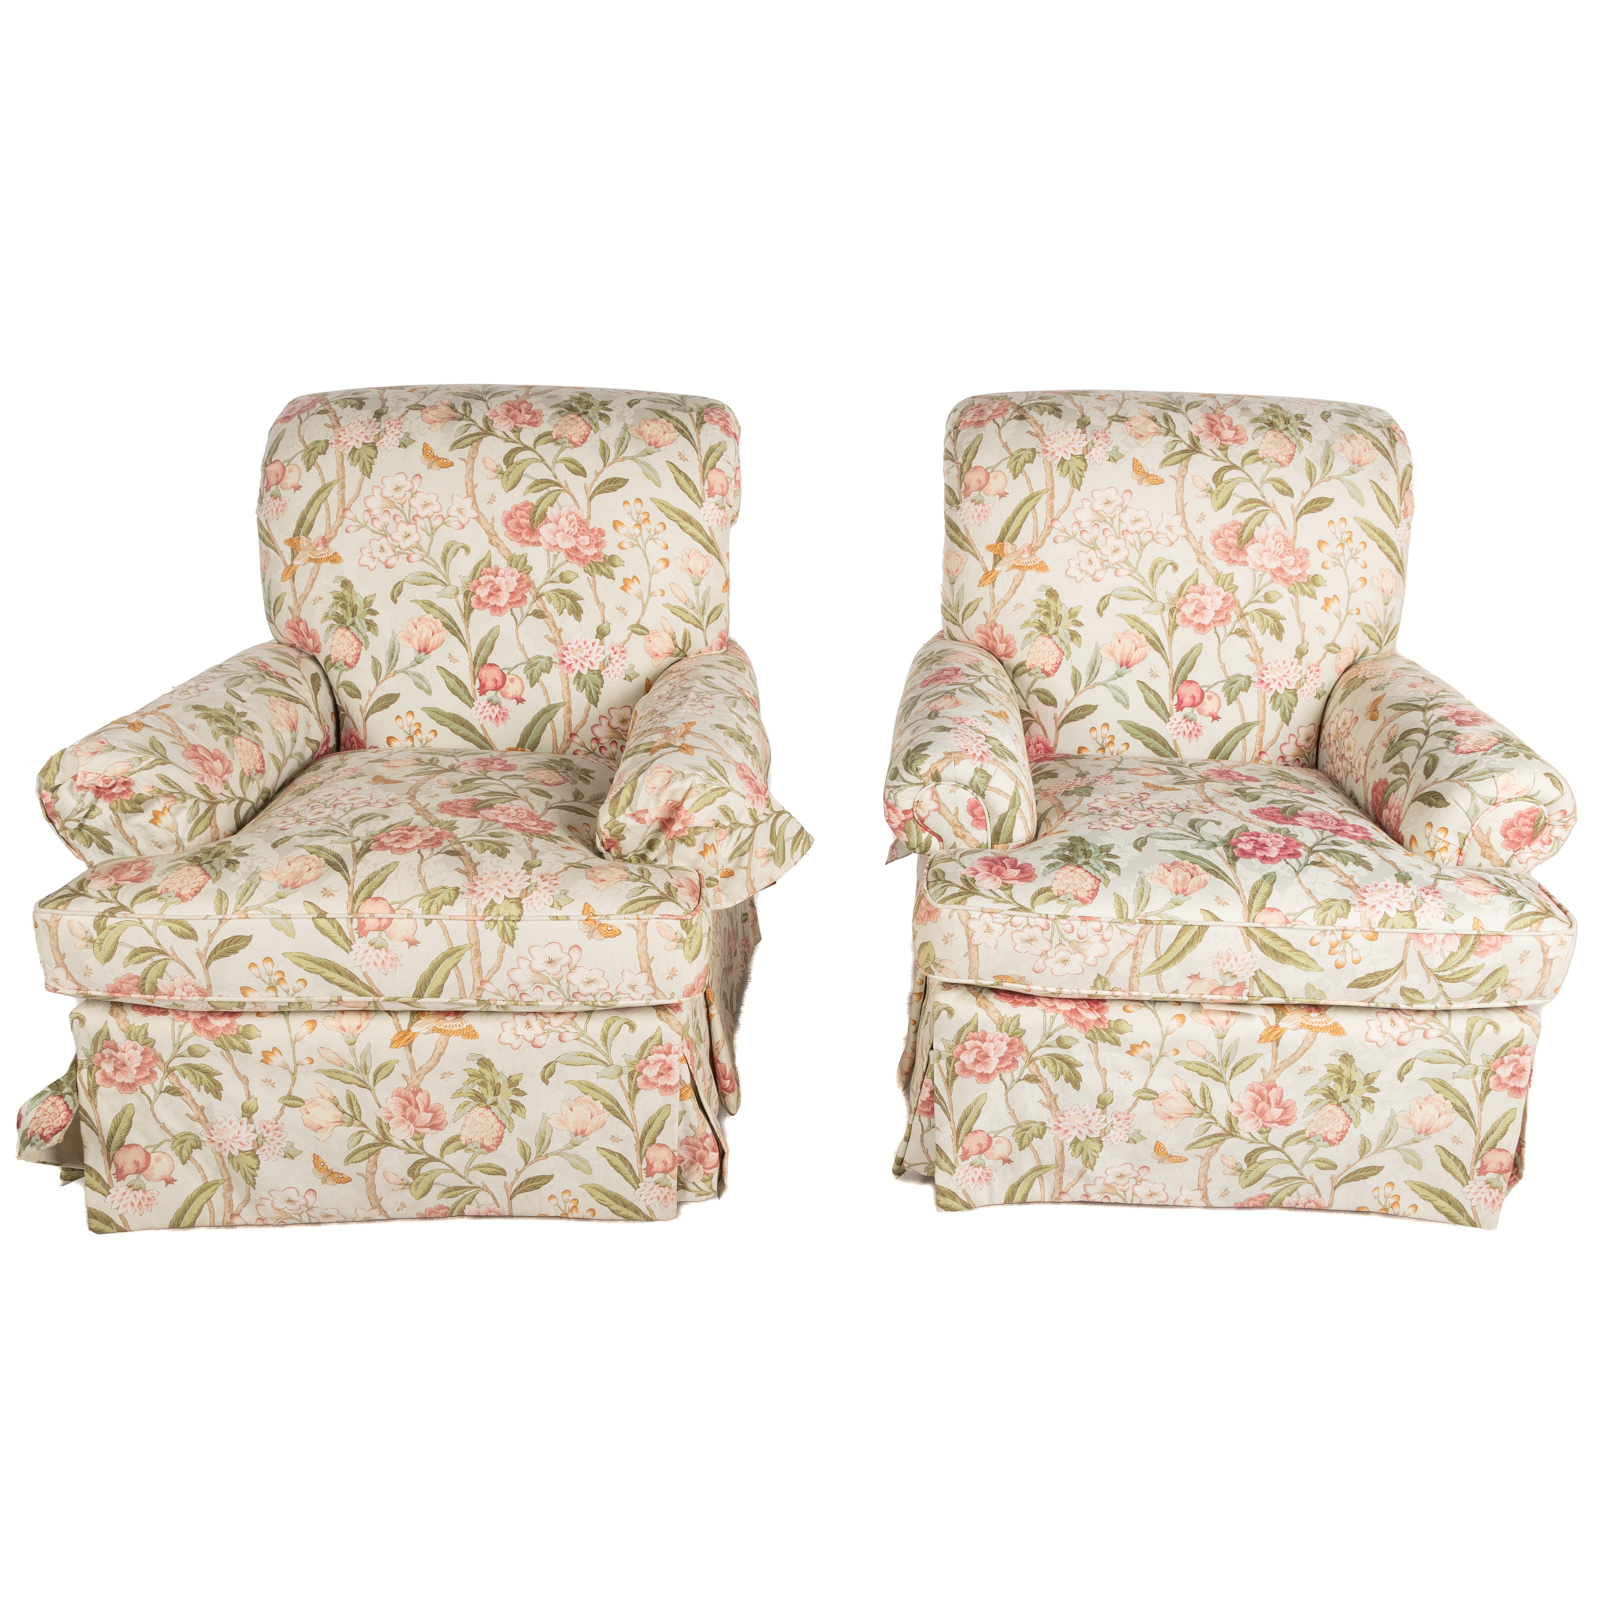 A PAIR OF UPHOLSTERED SWIVEL CHAIRS 3b2968